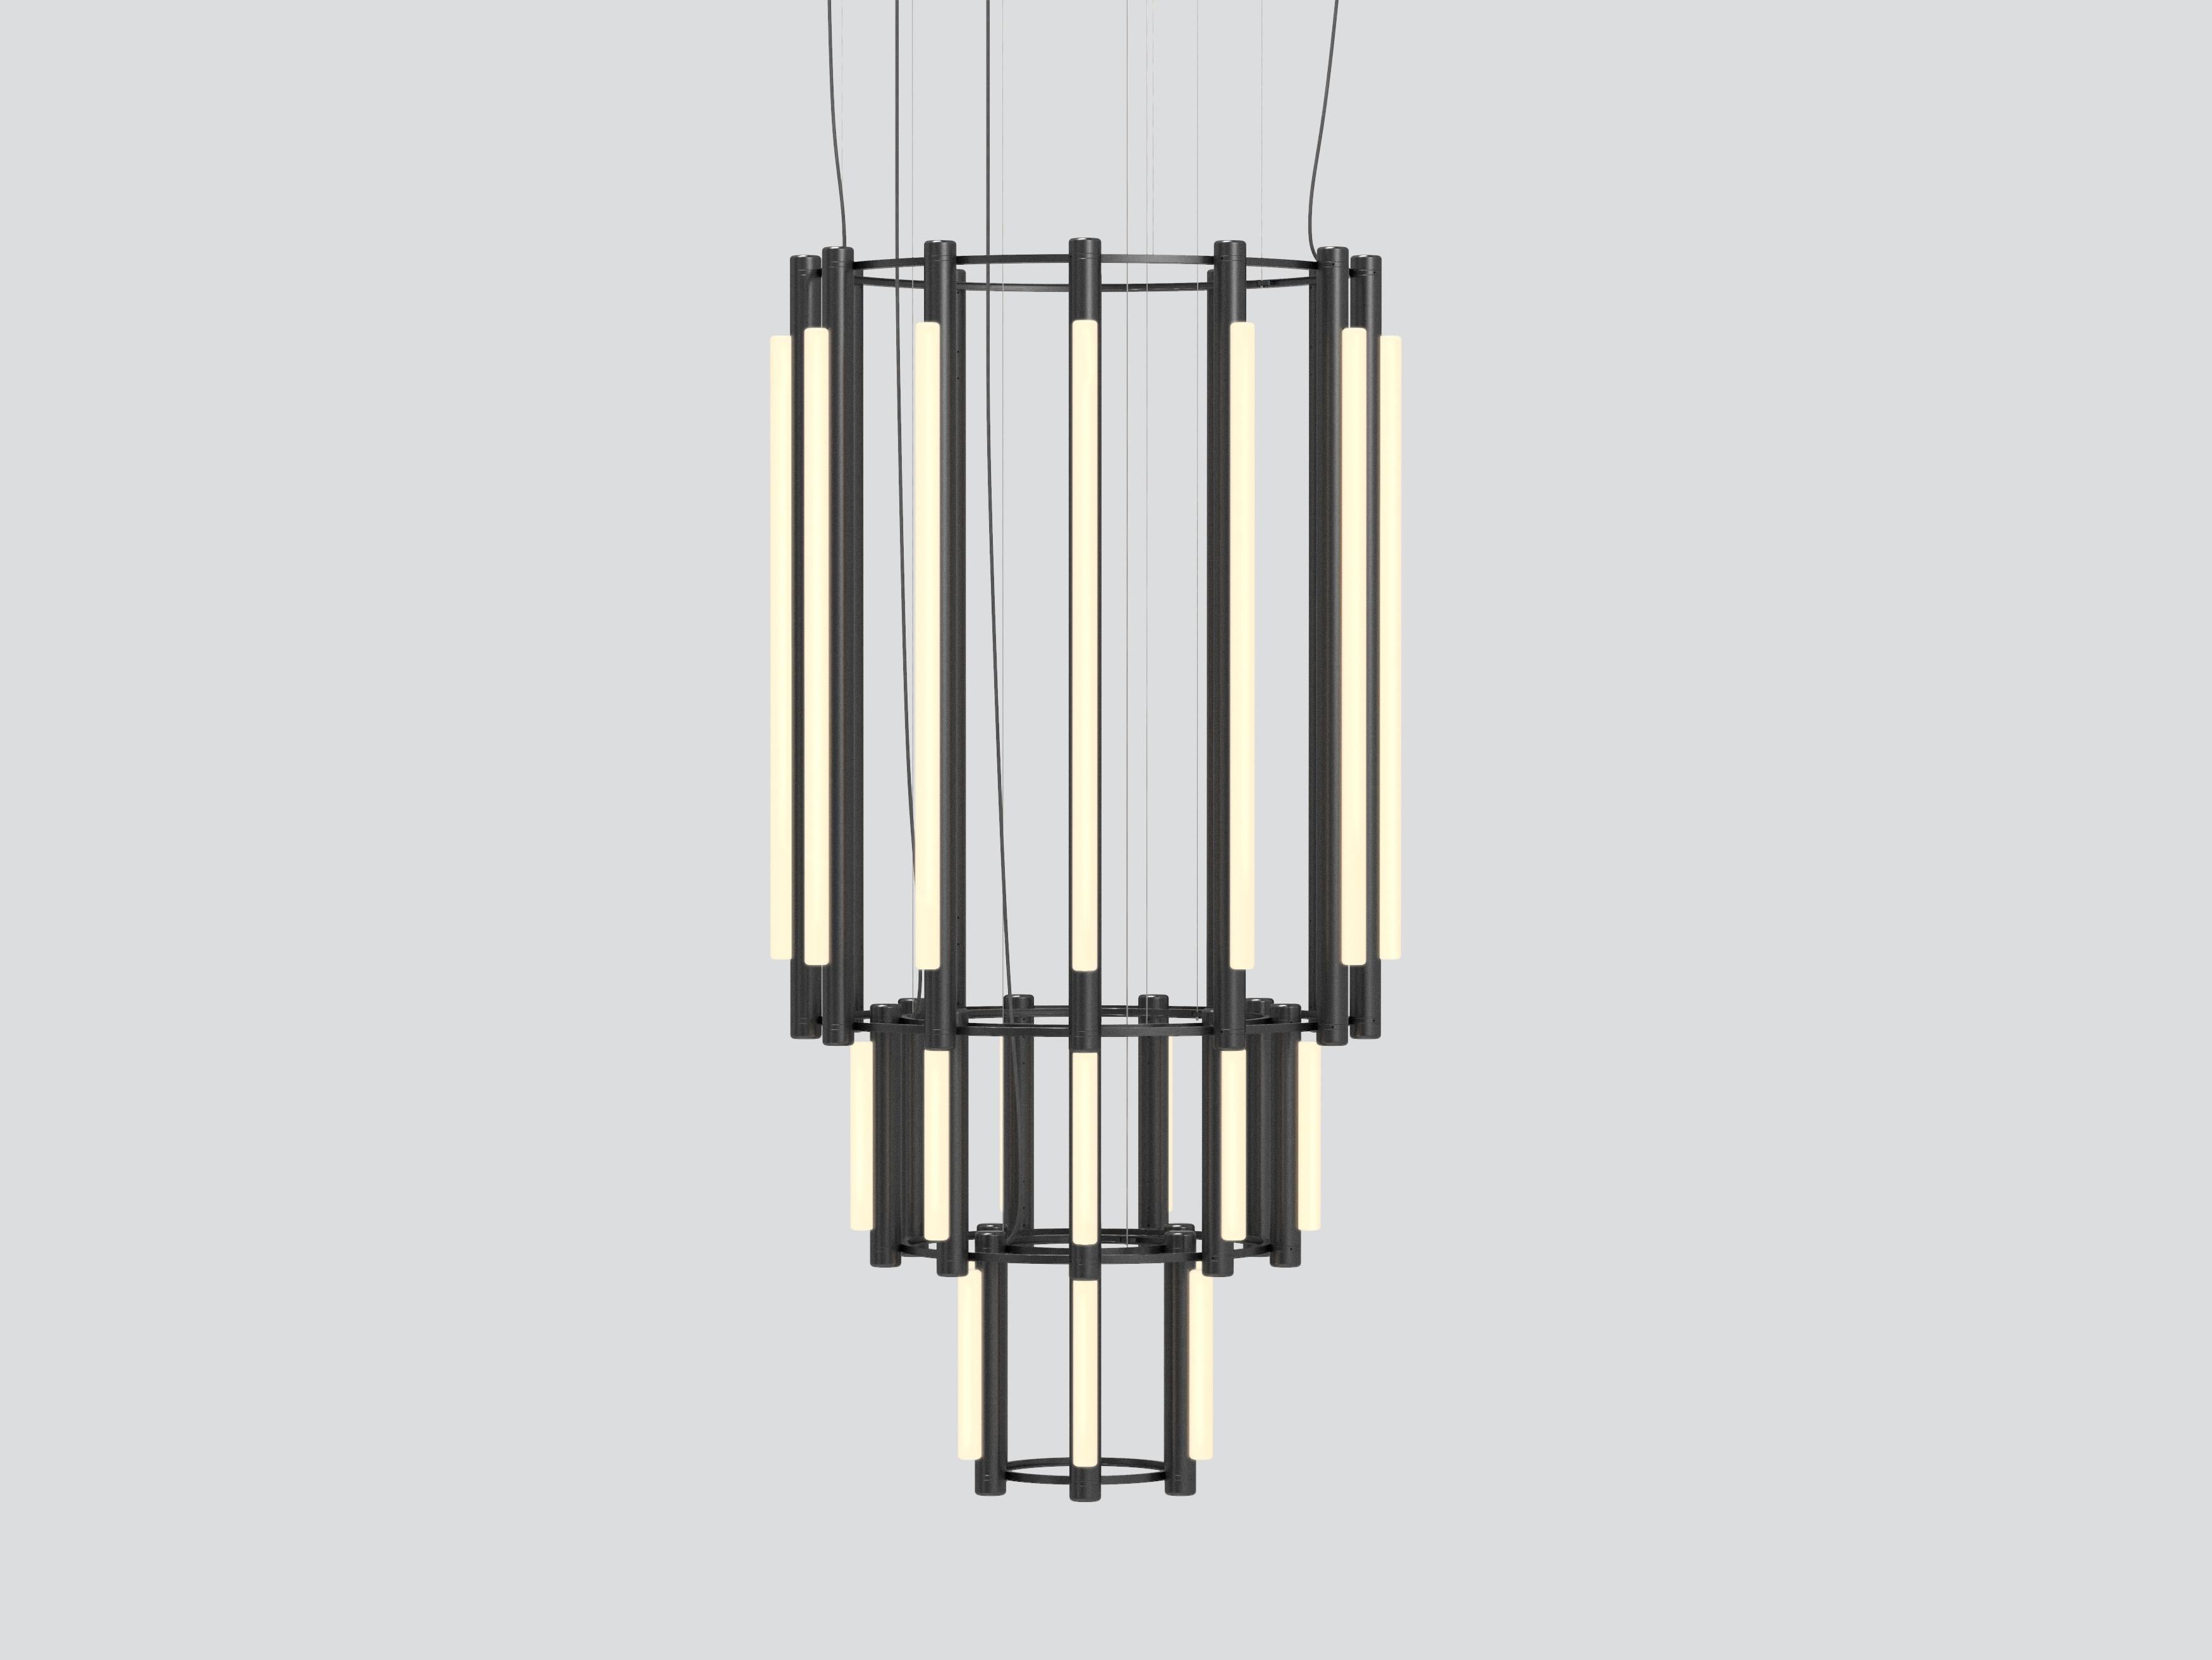 PIPELINE CHANDELIER 11 – PENDANT
by CAINE HEINTZMAN 

MATERIALS
– Aluminum Body
– Cast Acrylic

ELECTRICAL
– 12 x 15W + 15 x 5W LED
– 47,000 hour Lifetime
– 90+ CRI
– Input Voltage 100–240V + 277V
– Integral 24V DC power supply included